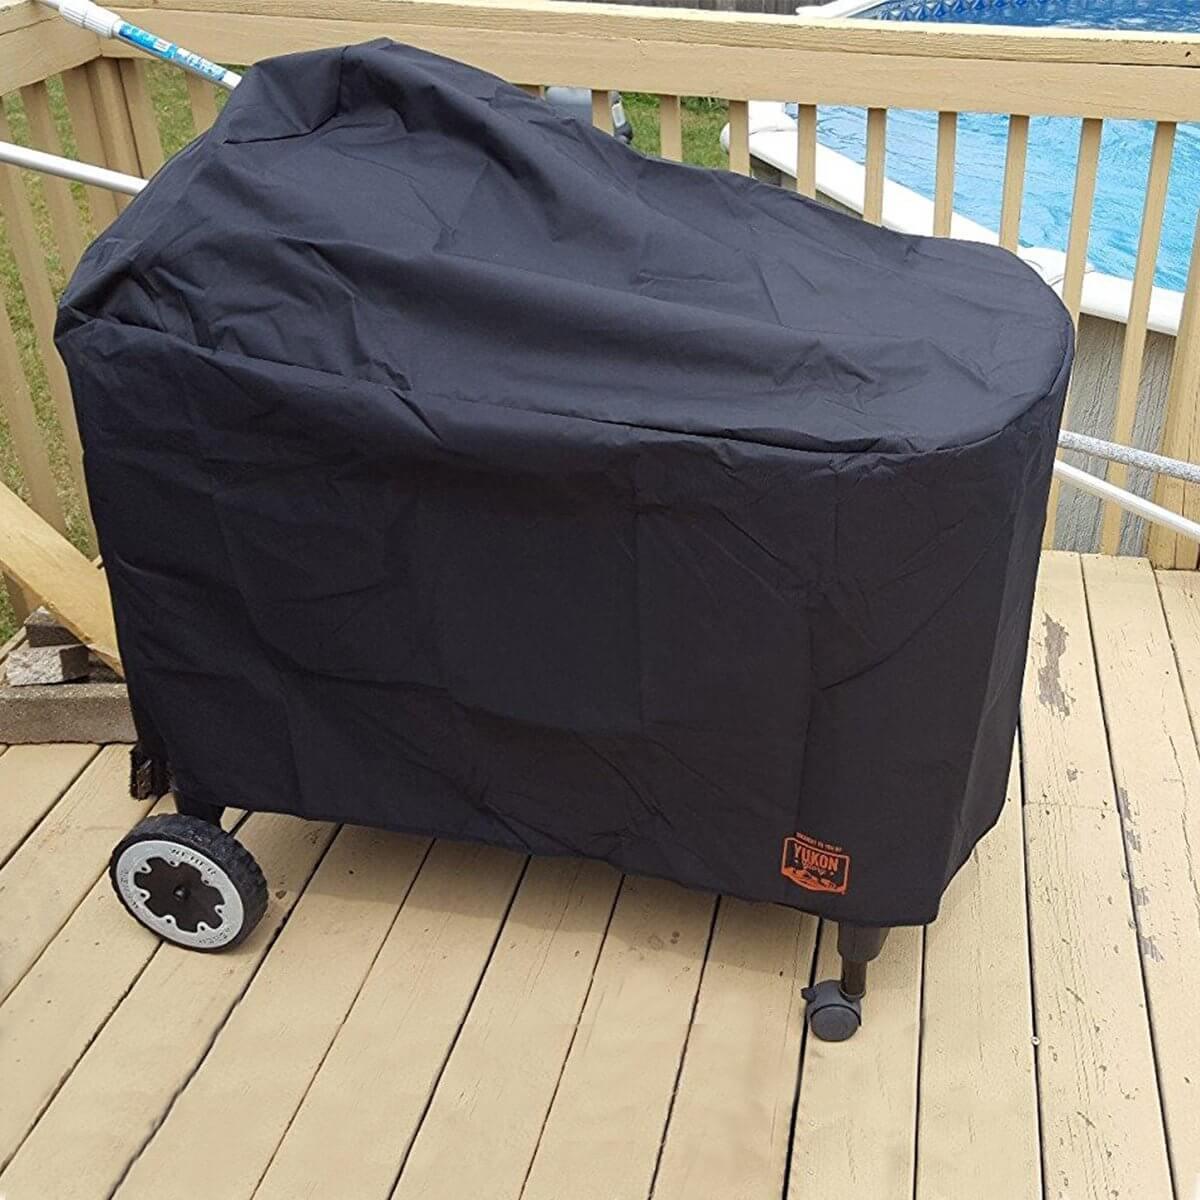 Premium Grill Cover for 22" Weber Performer Charcoal Grills Home & Garden from yukonglory